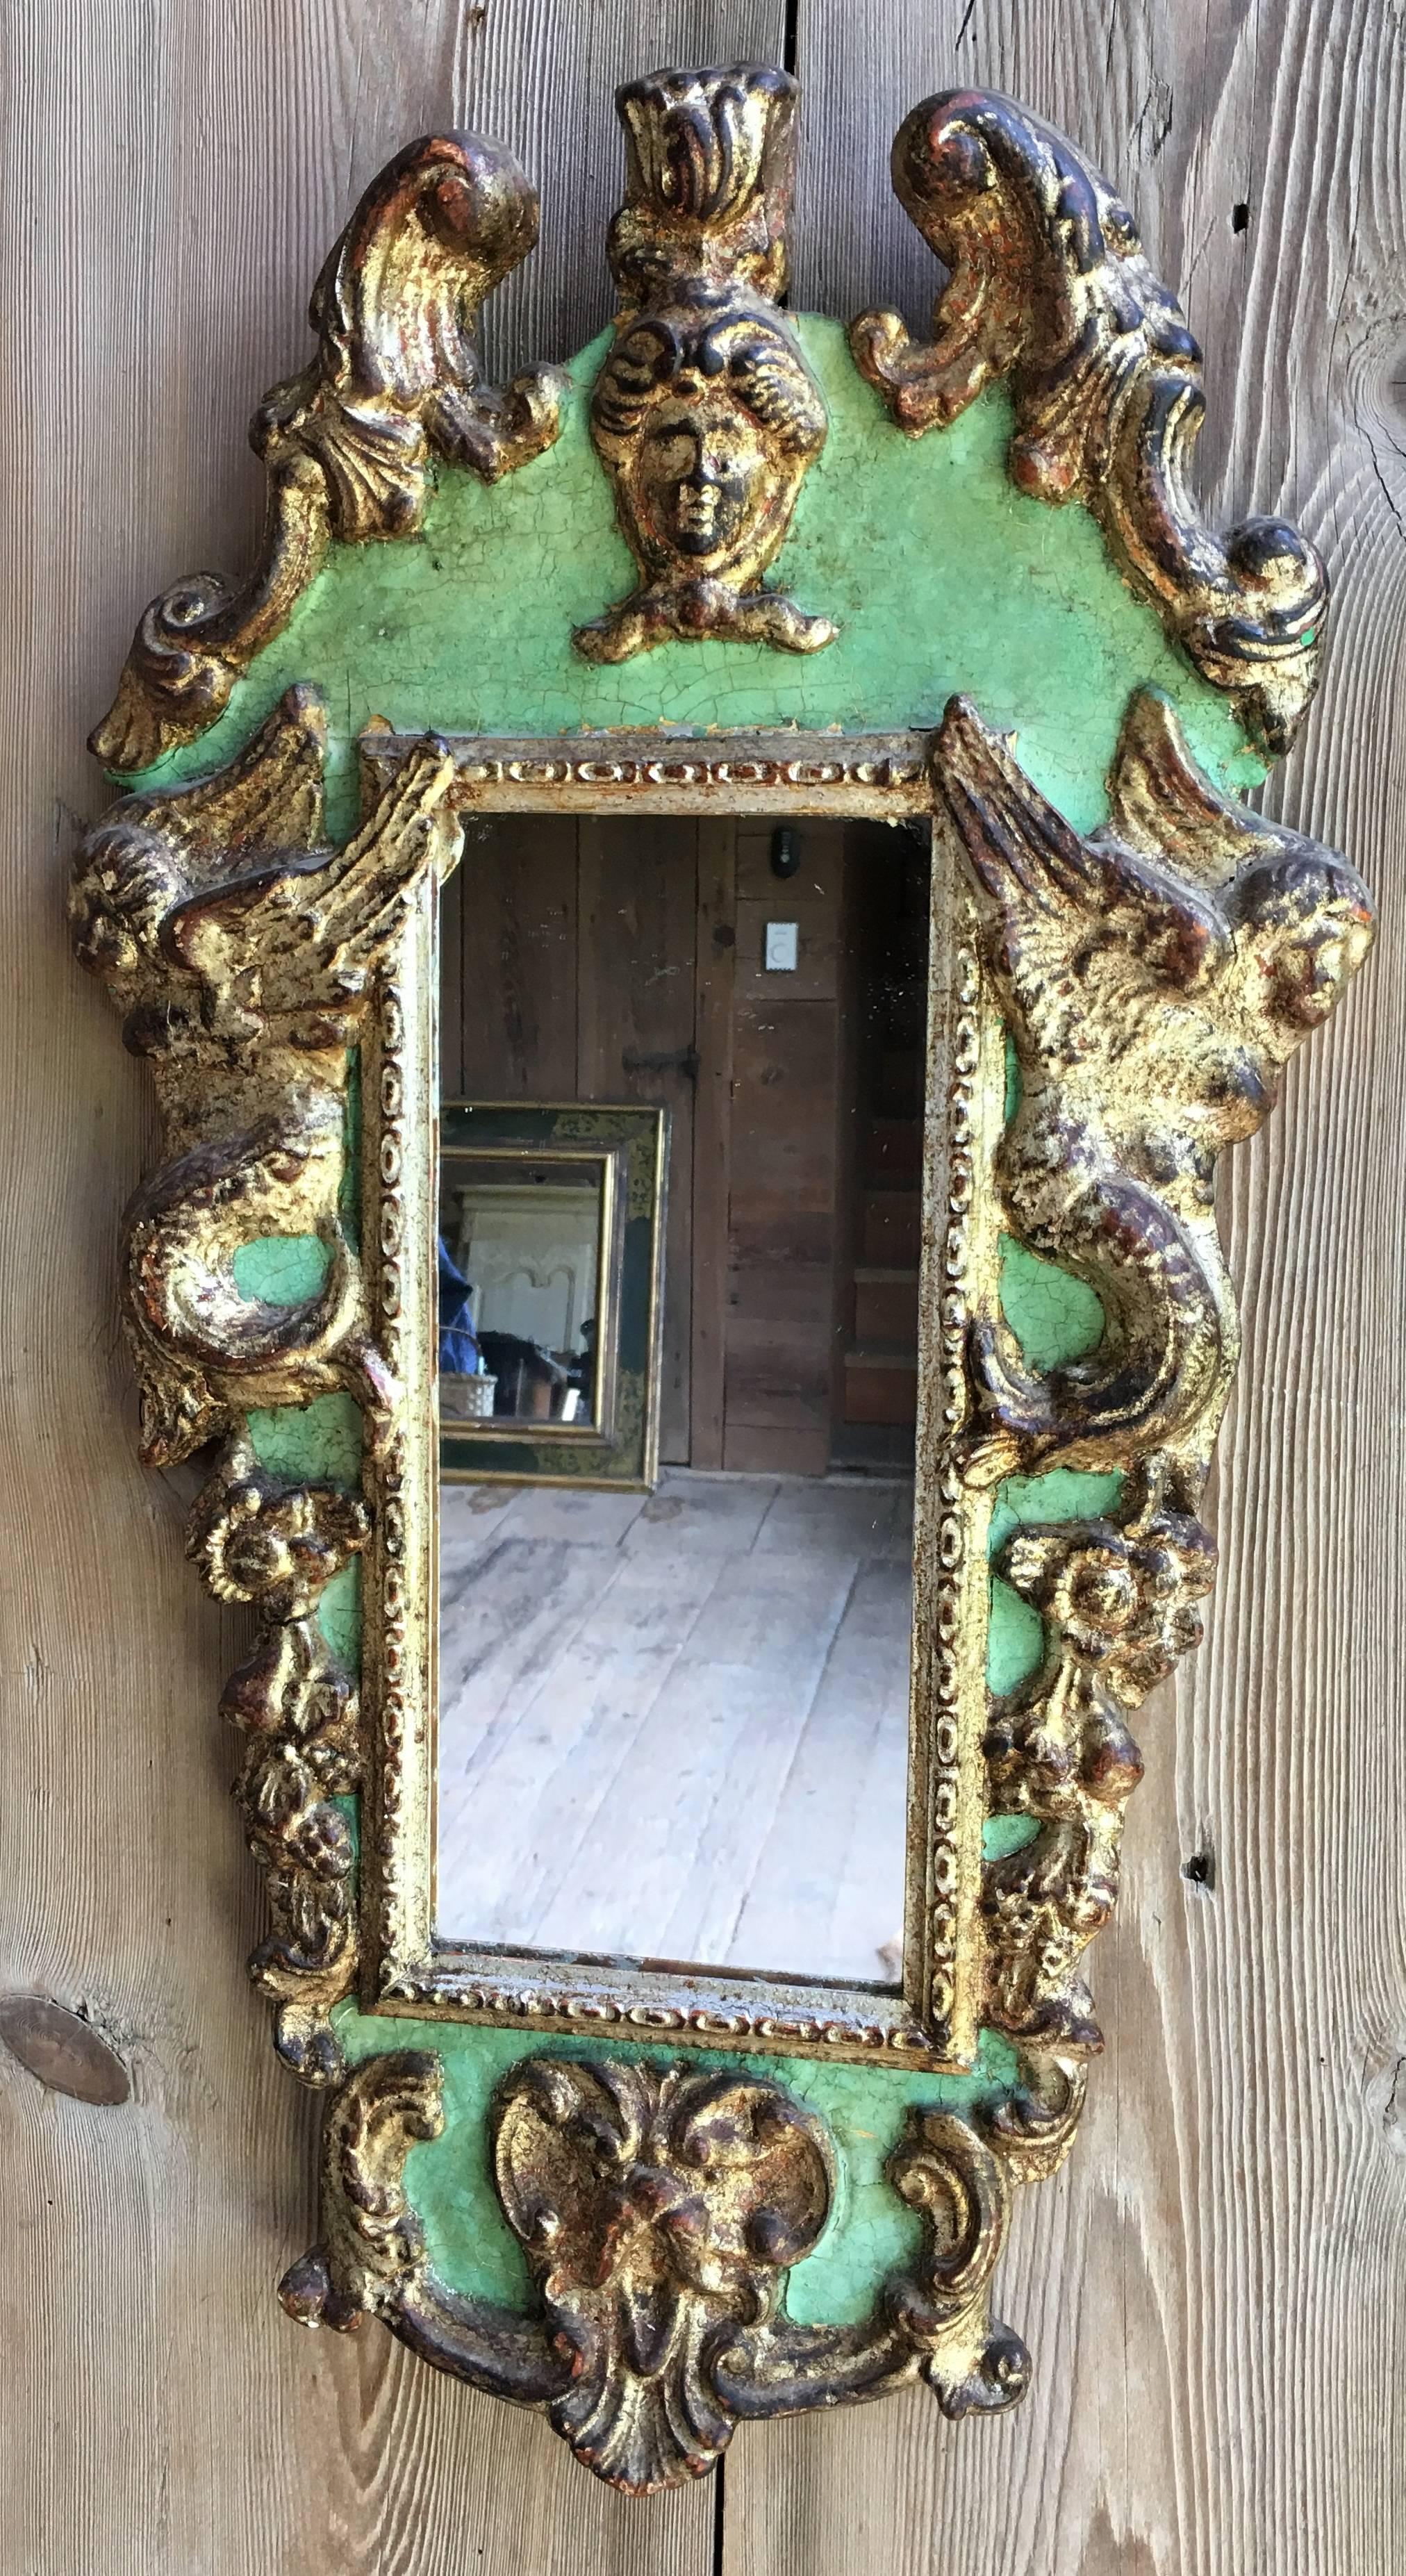 A decorative pair of Italian Baroque style mirrors in green painted finish and parcel-gilt decoration, possibly 20th century. Carved with cherubs and garlands.